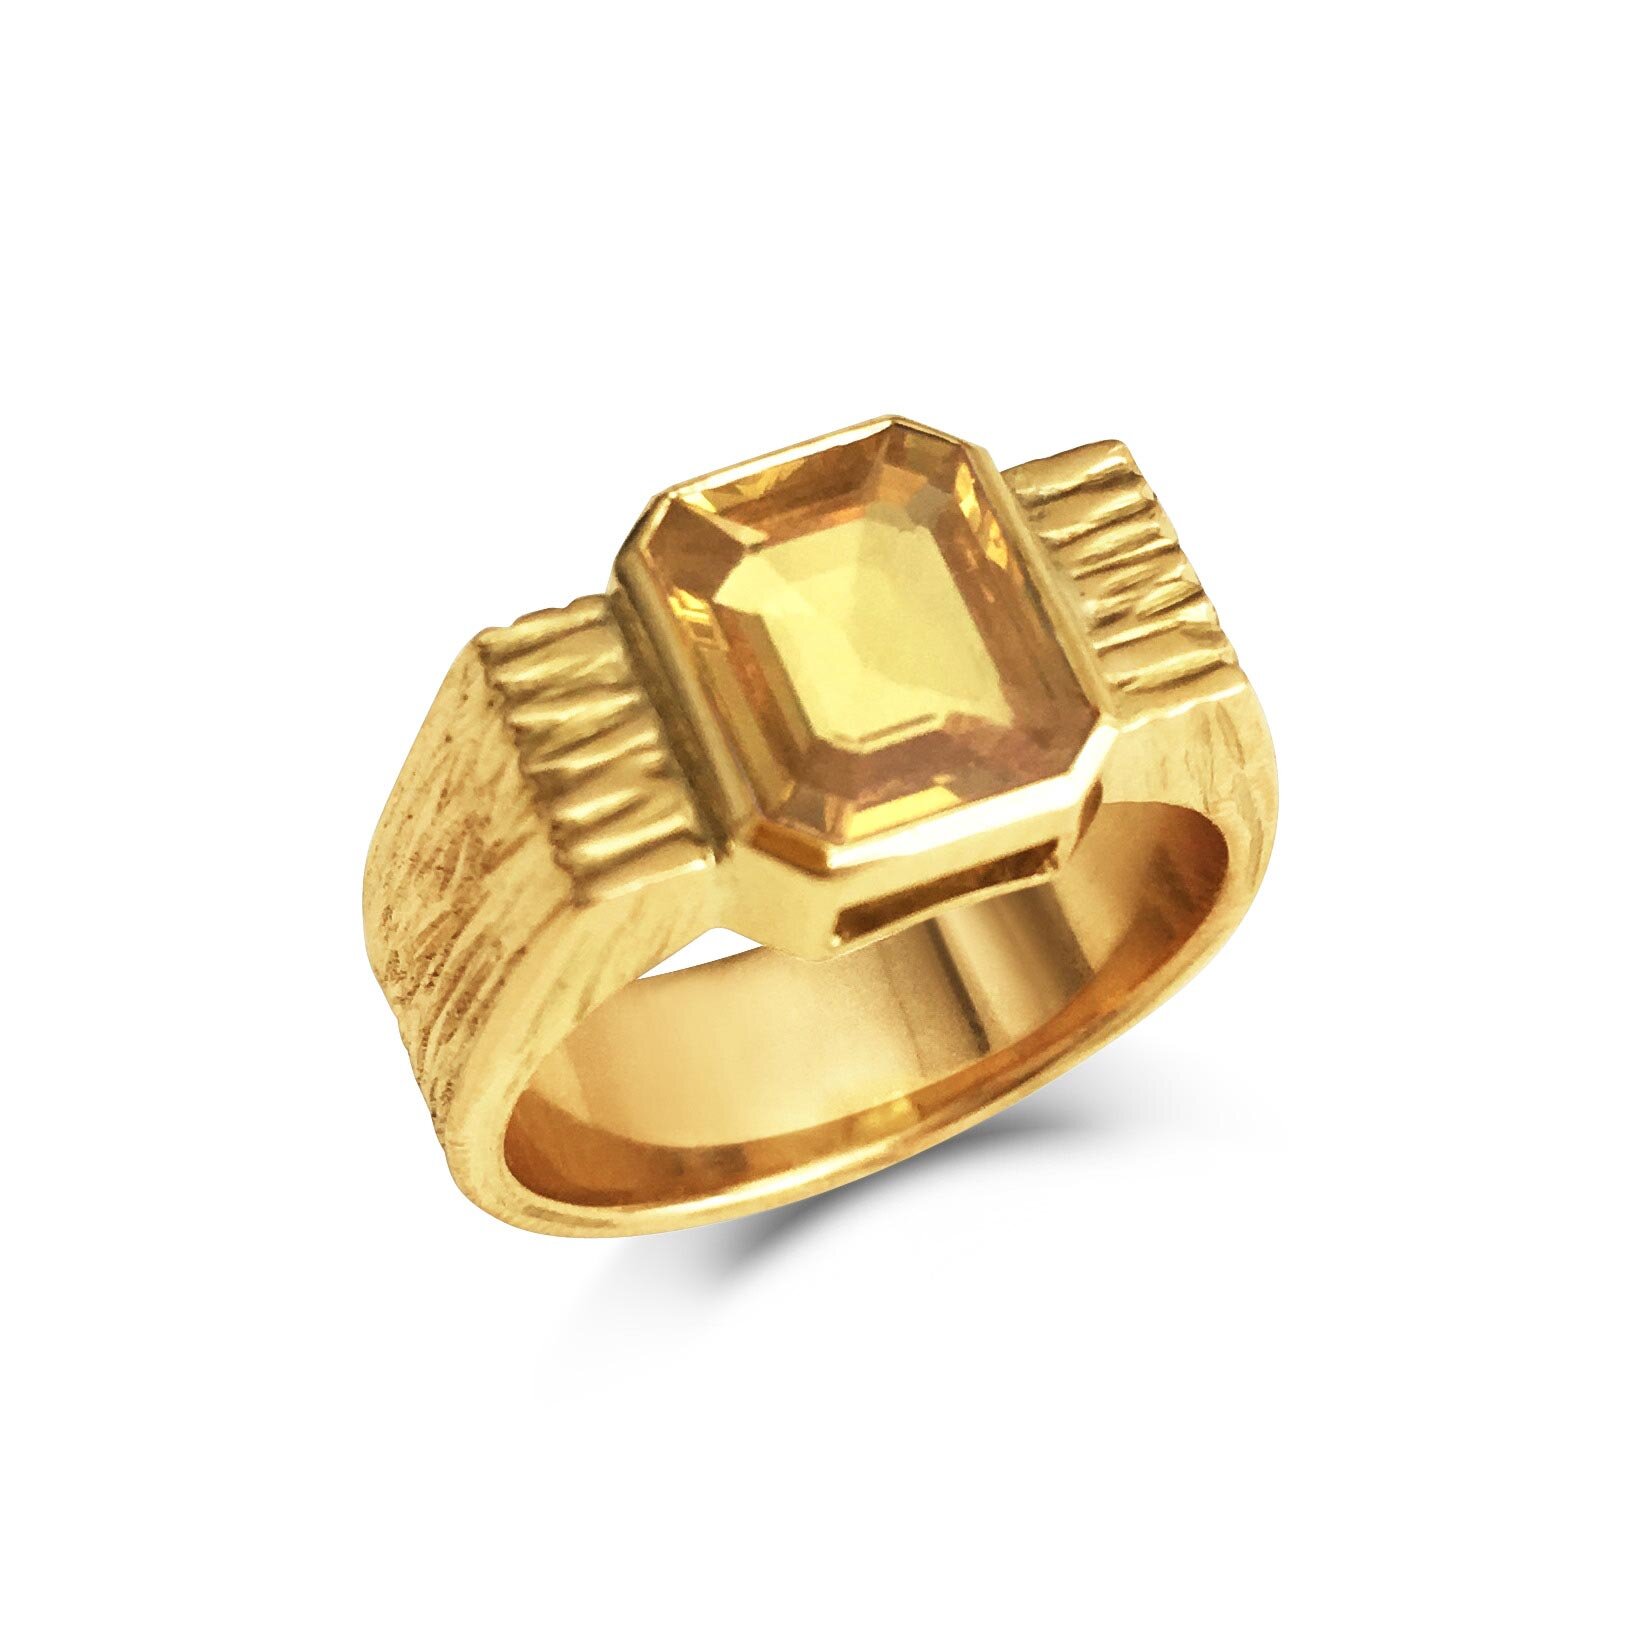 Yellow sapphire ring mounted in 18ct yellow gold.